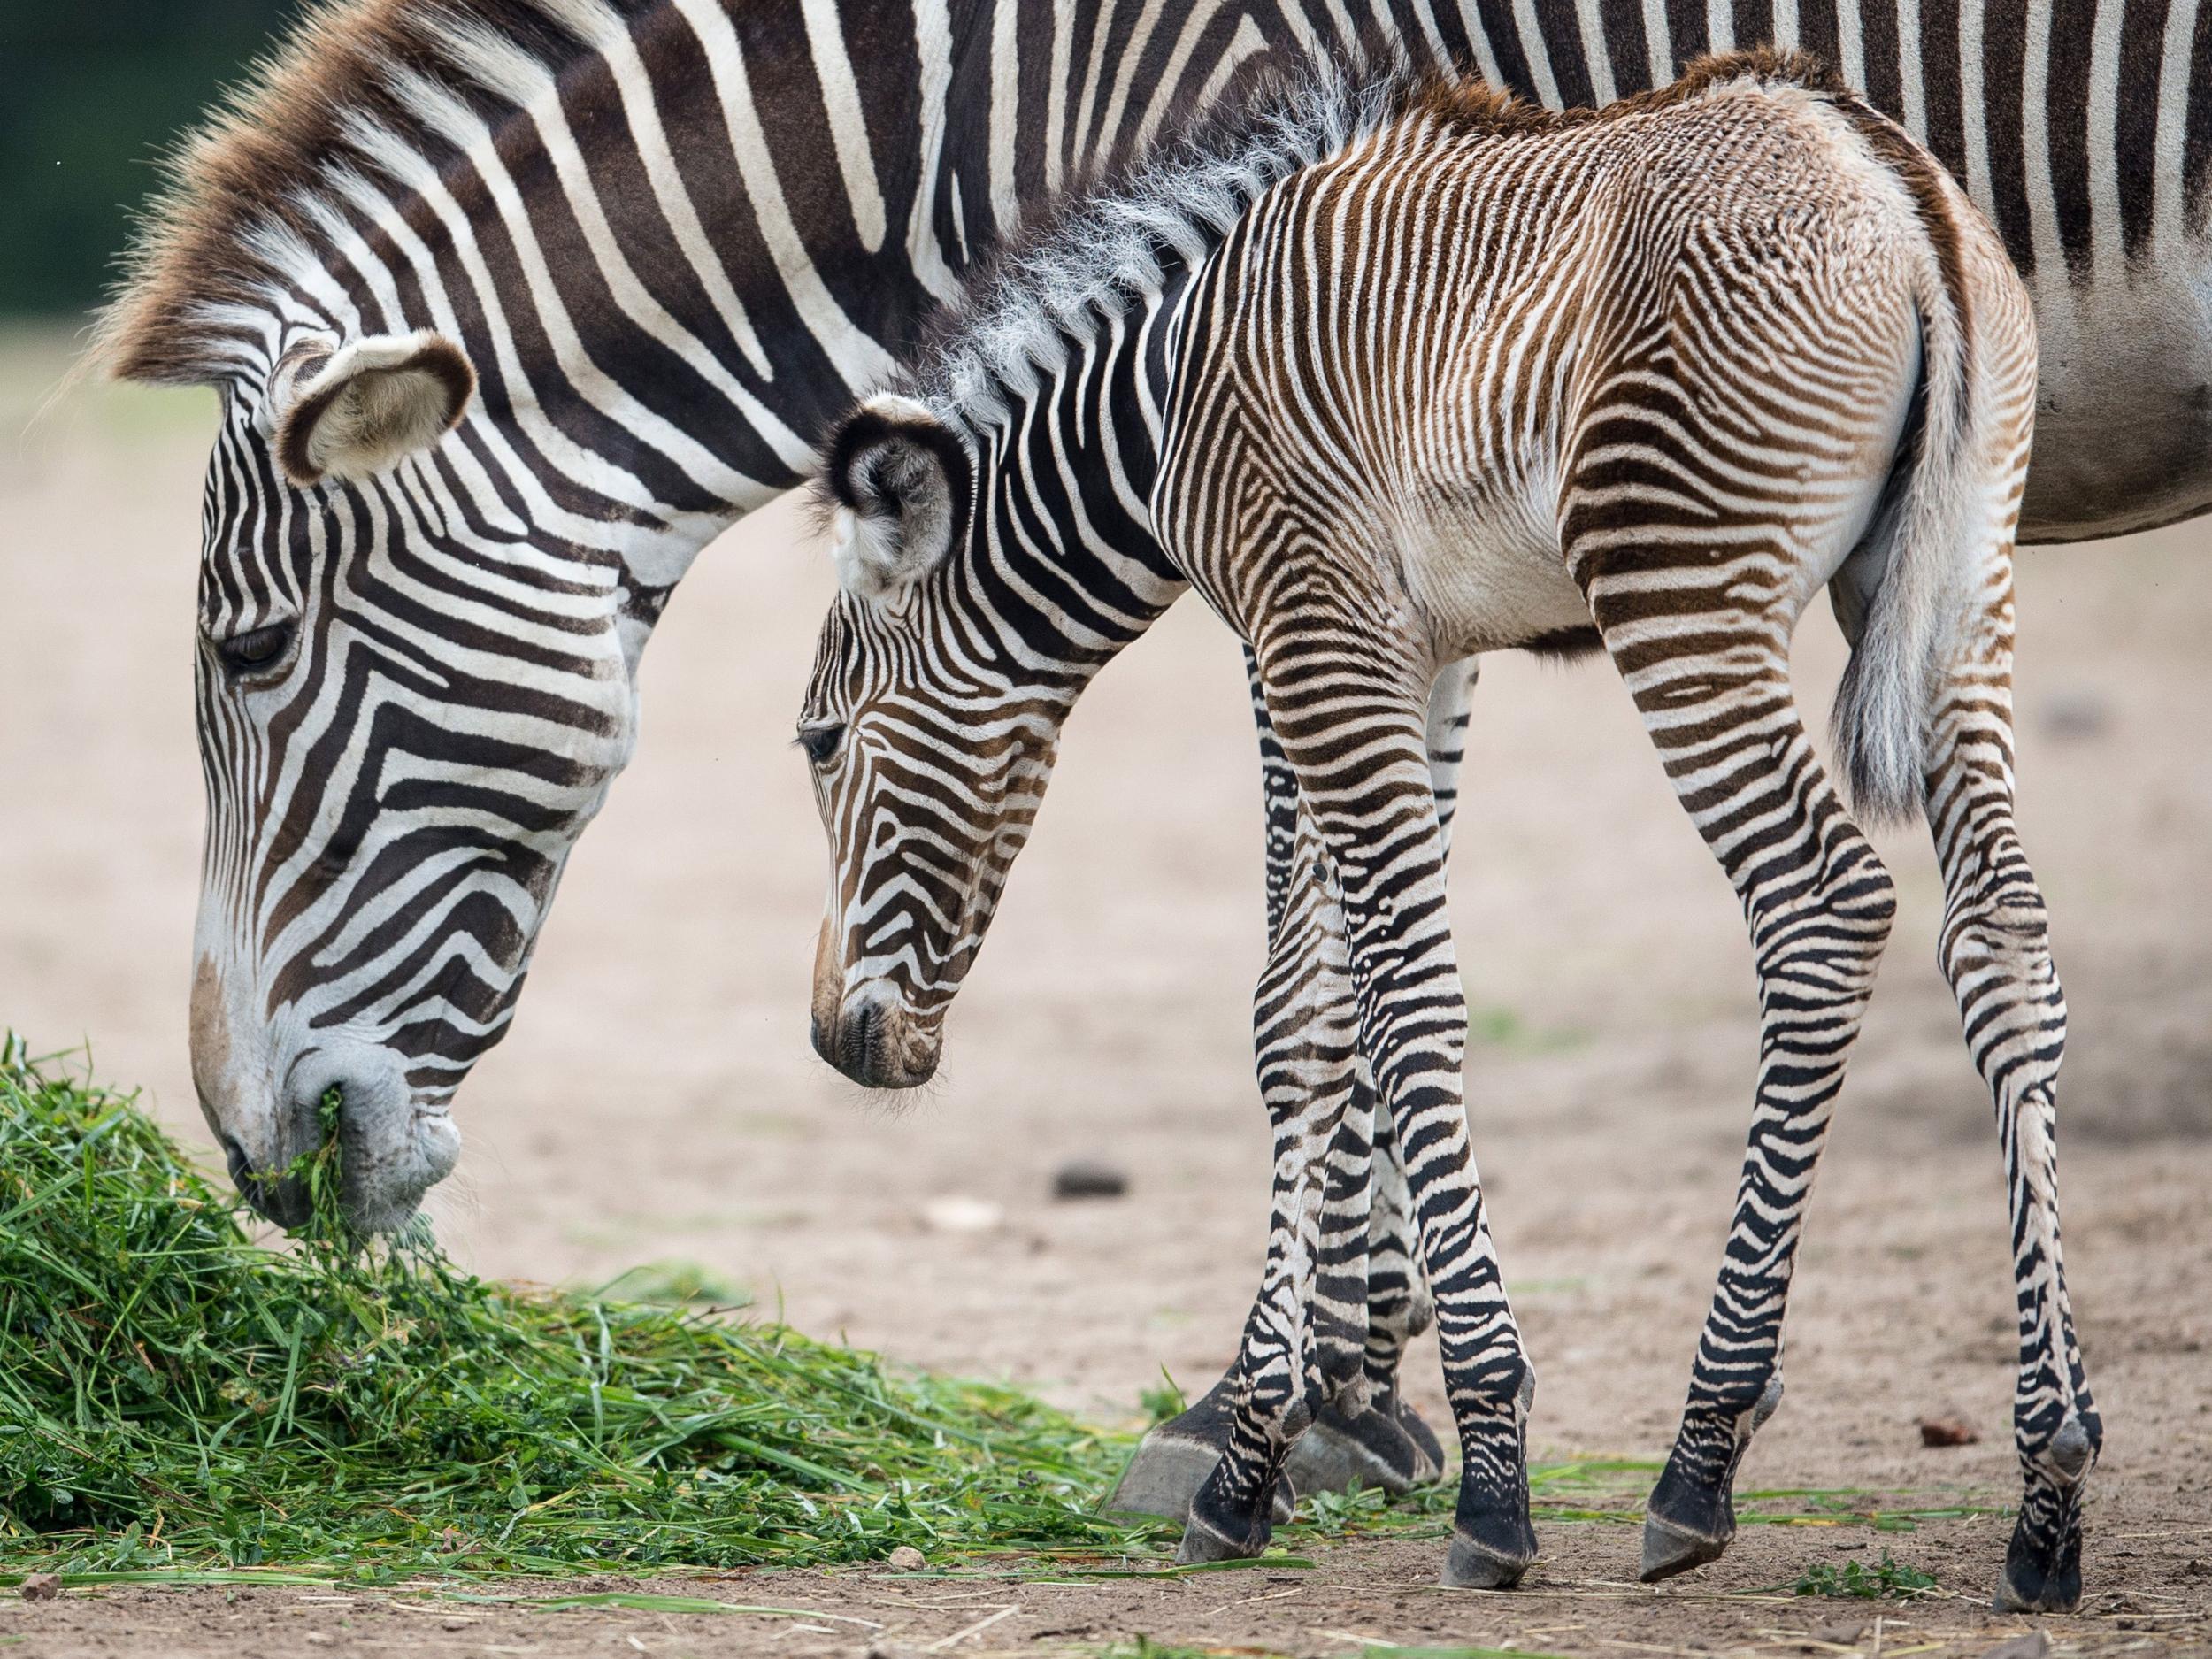 A new born zebra and its mother Getty